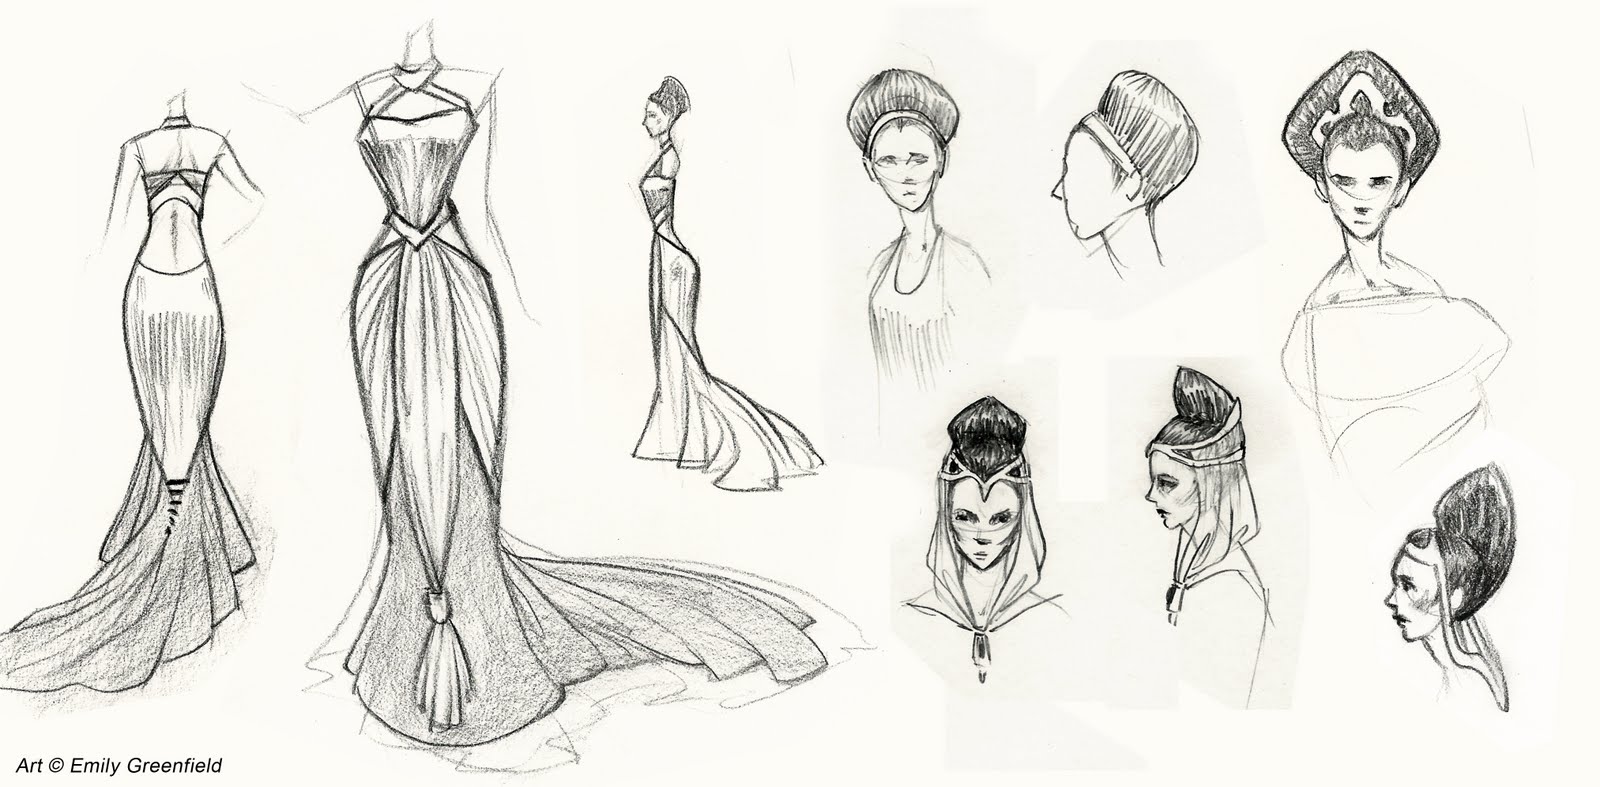 Emily's Sketchblog: Padme Inspired Fashion Sketches